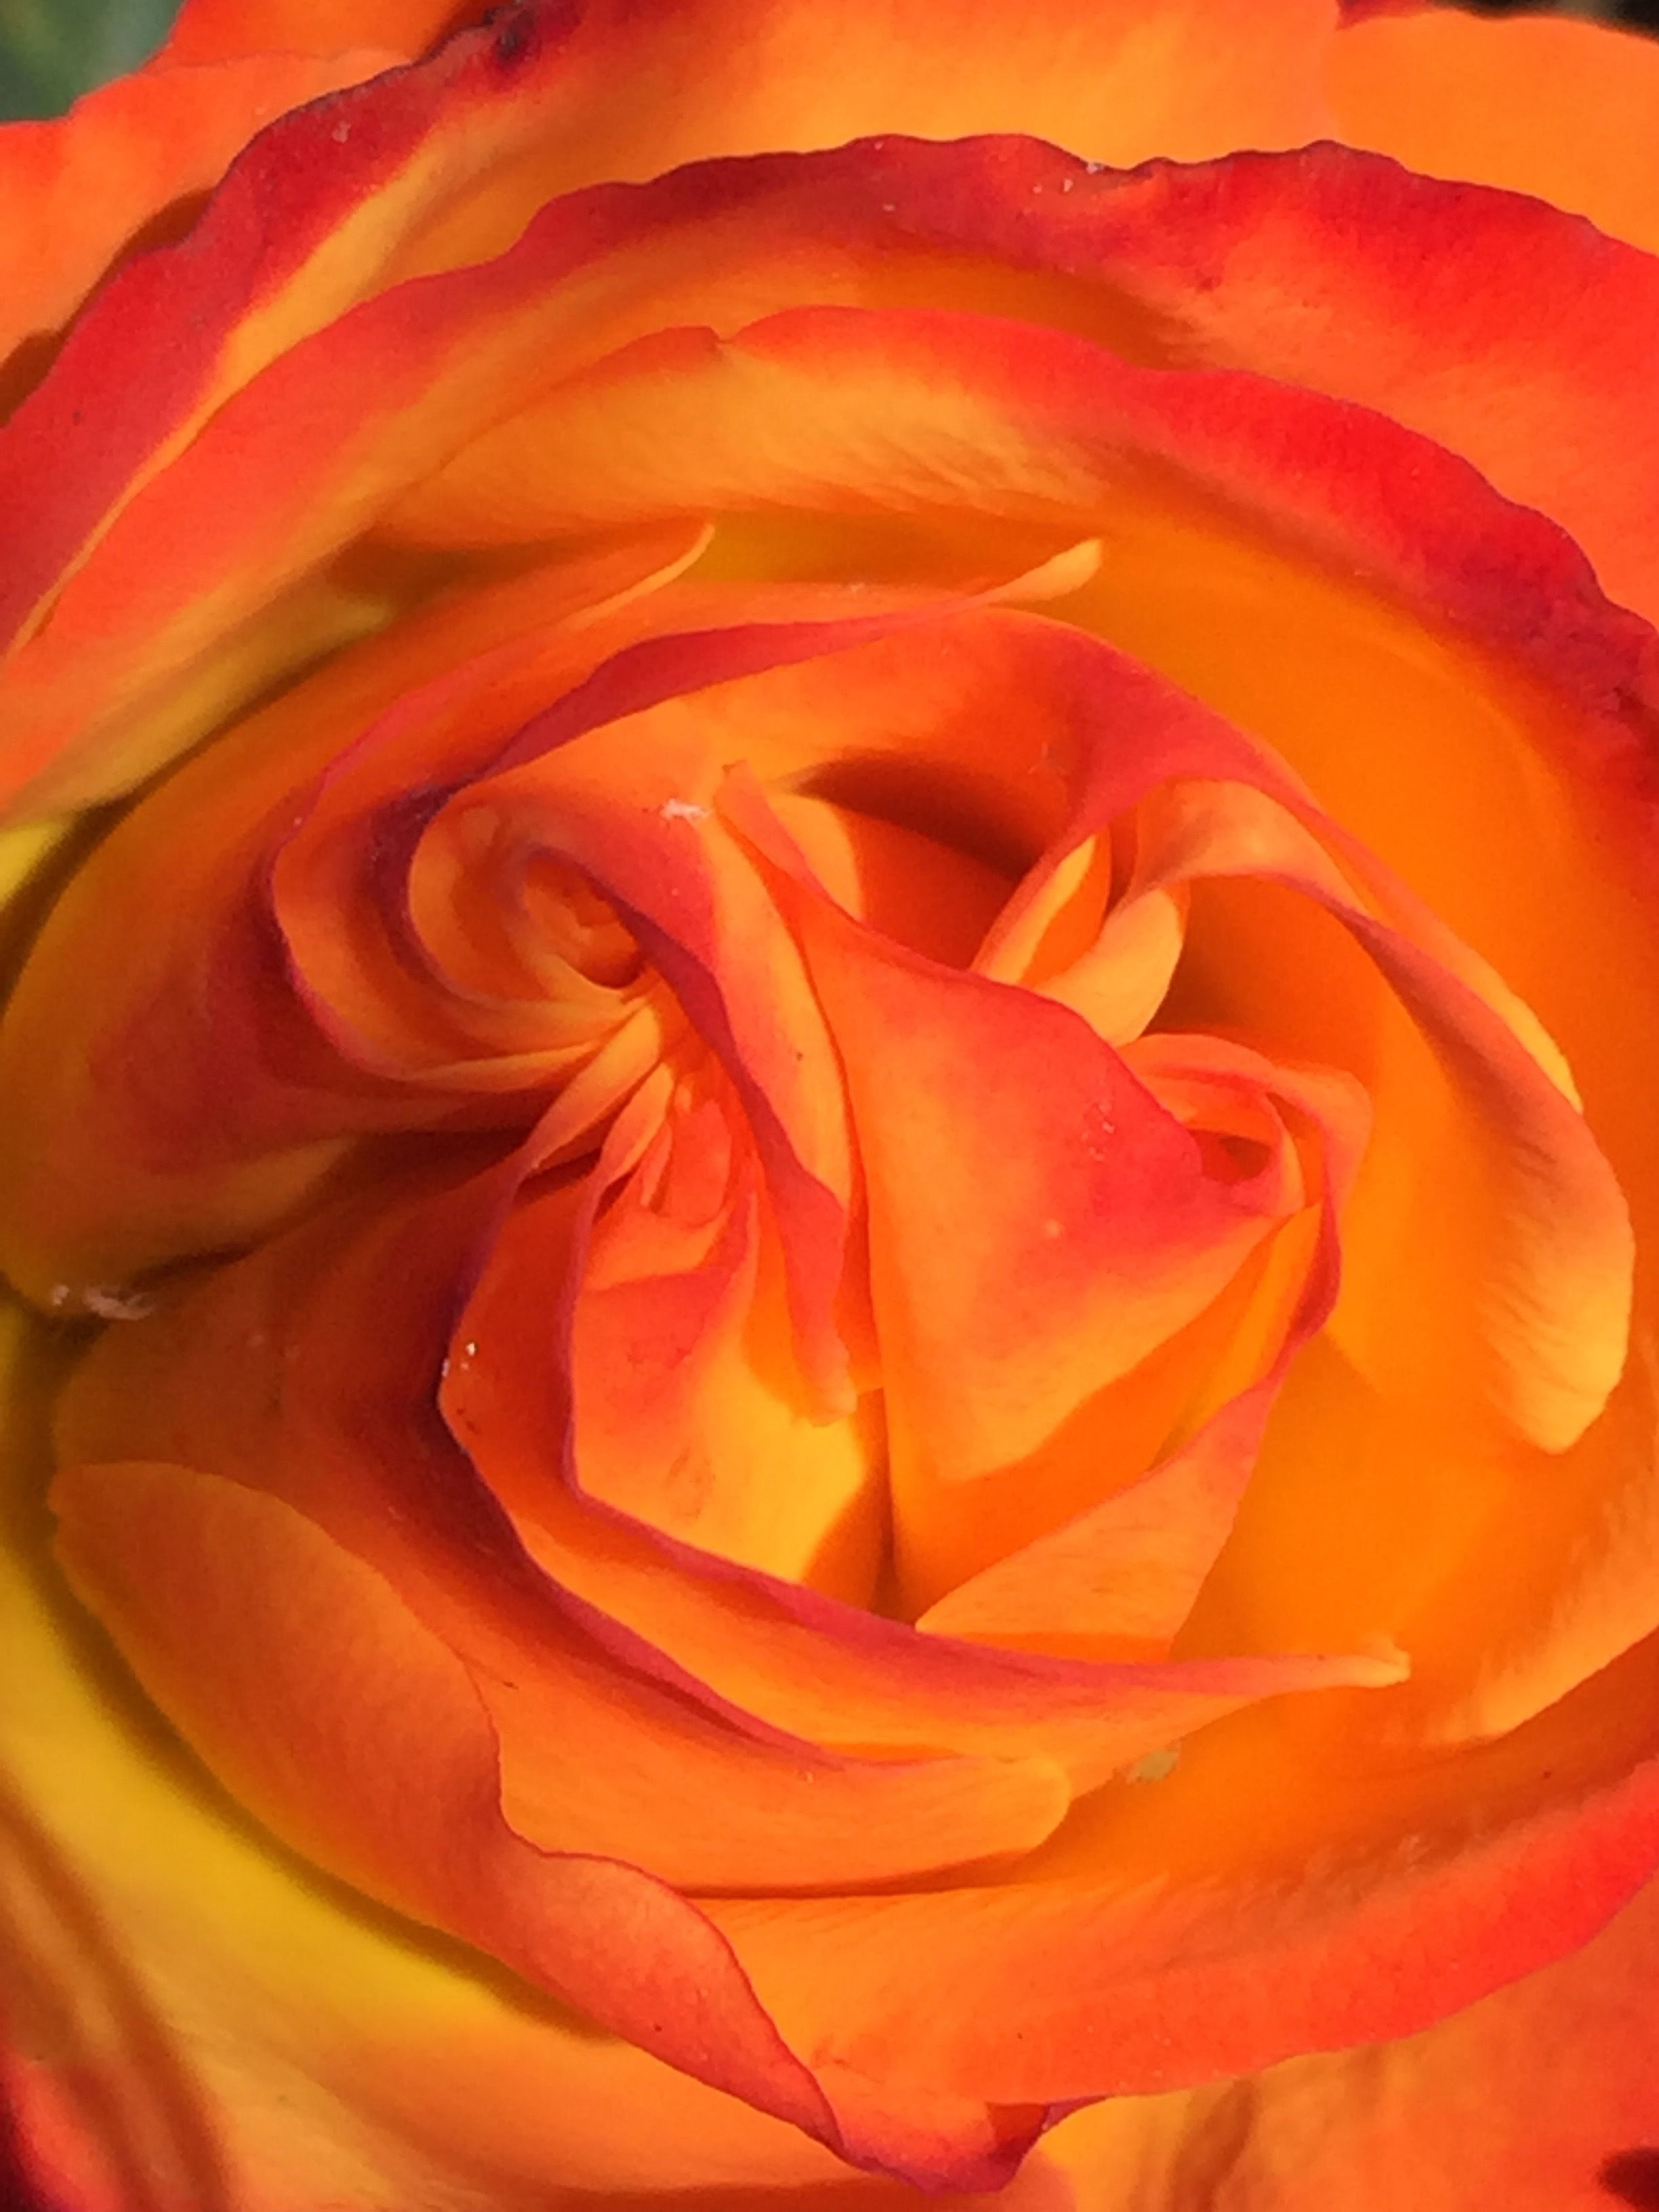 Bred by Barni, Italy, this fiery bright rose is a floriferous ...